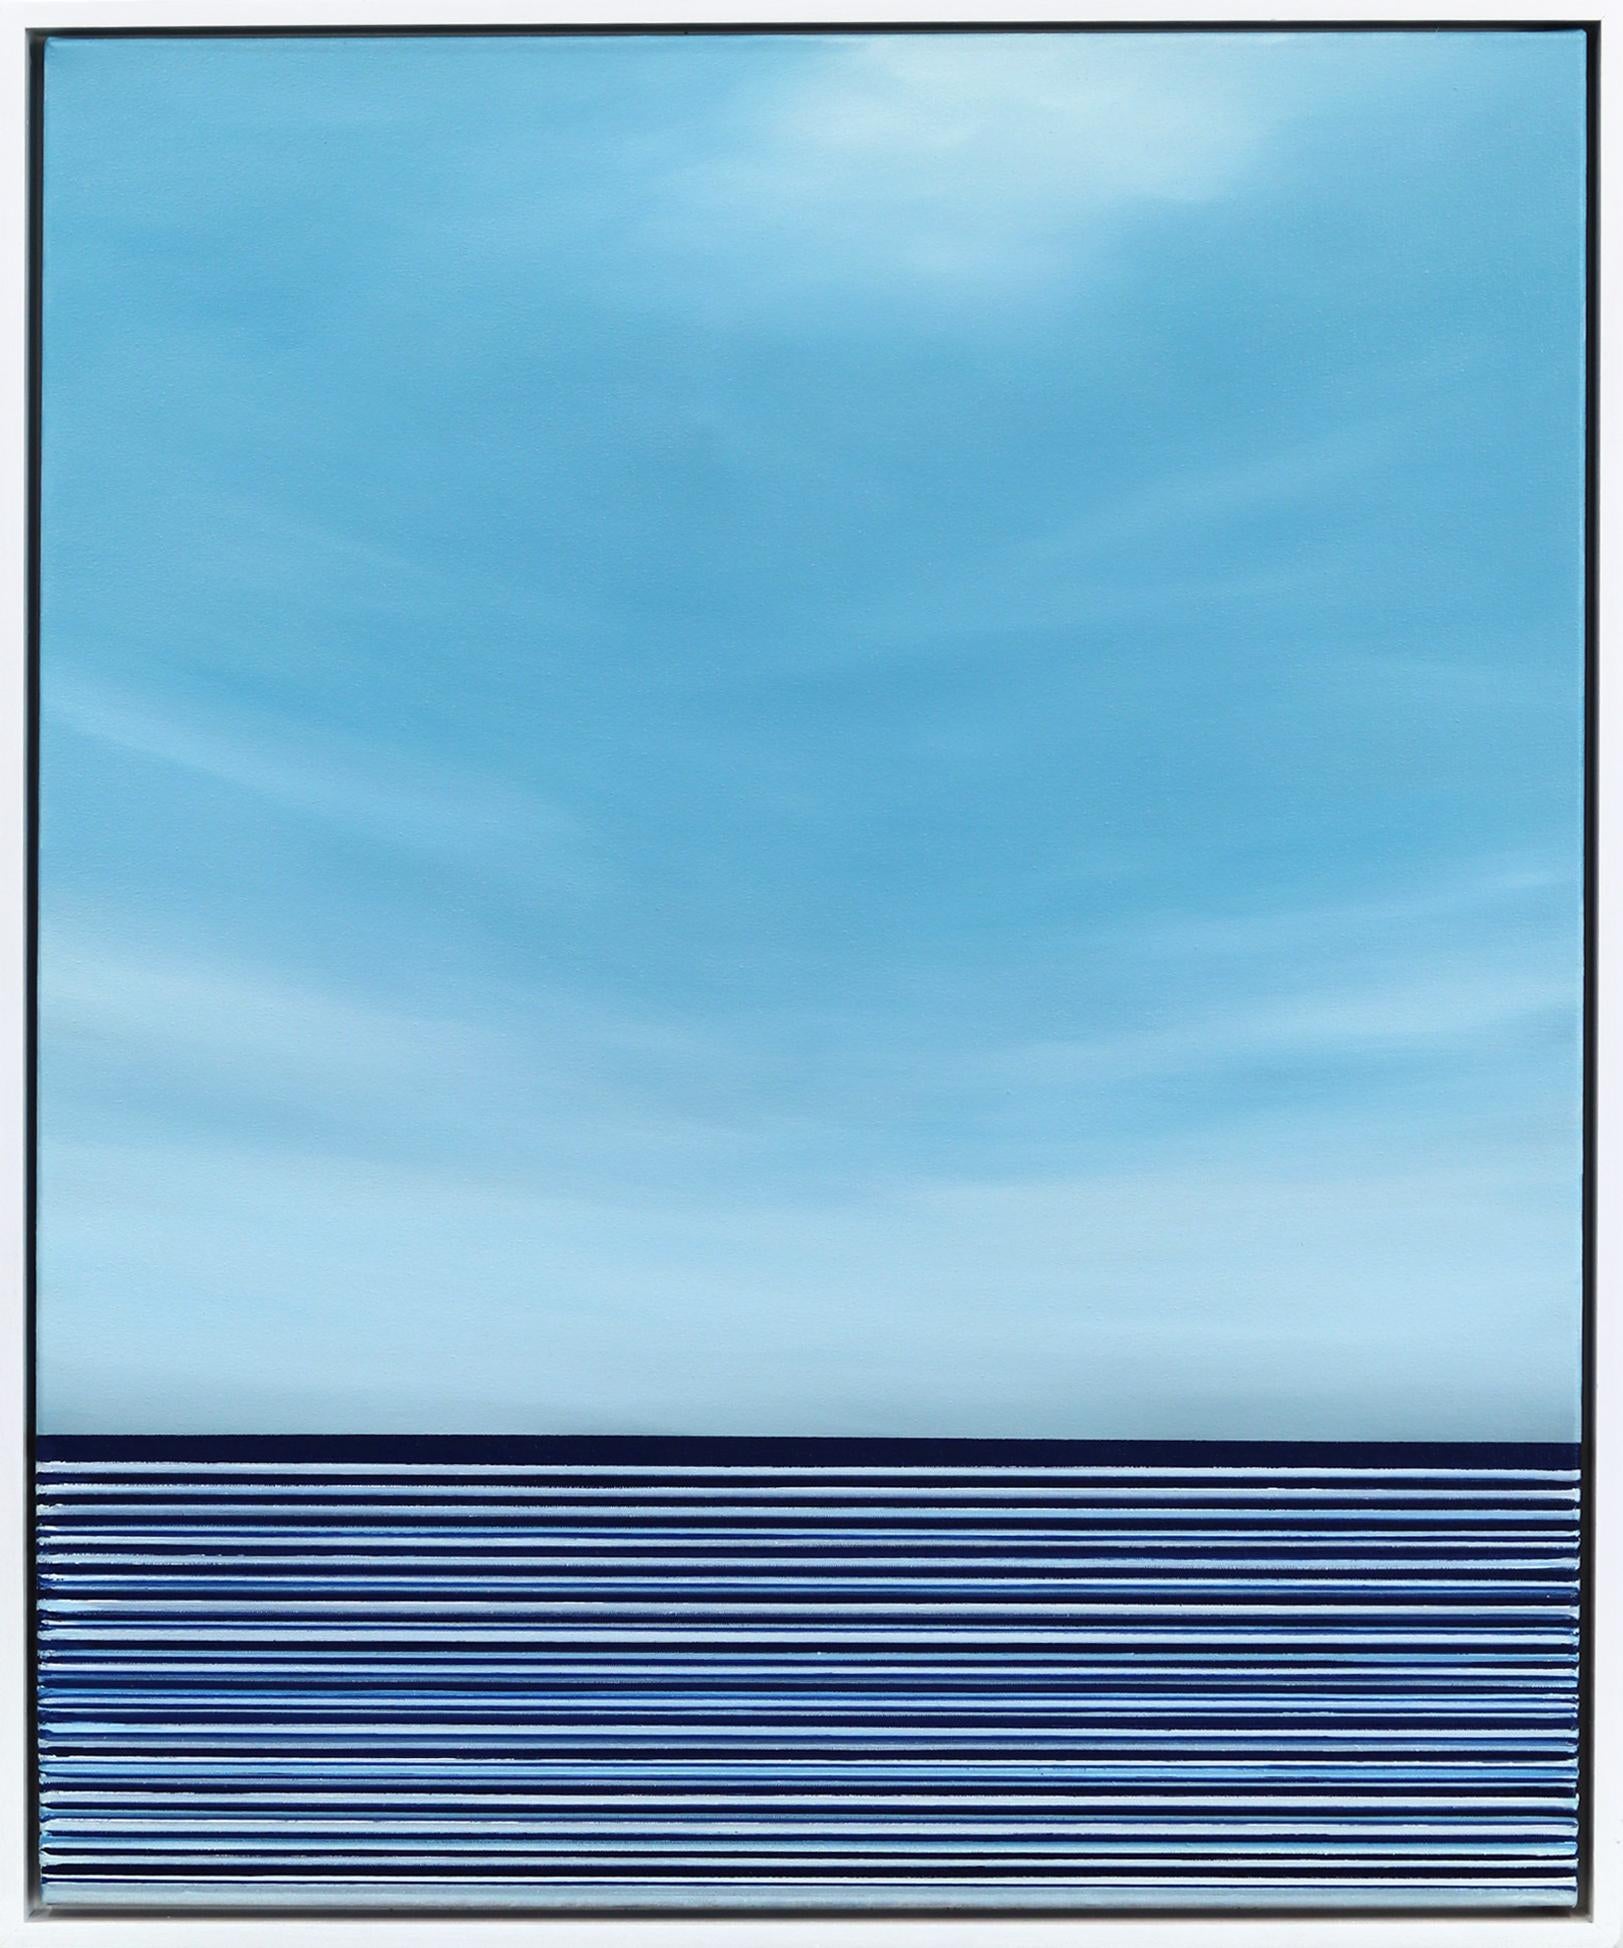 Jeremy  Prim Abstract Painting - Untitled No. 769 - Framed Contemporary Minimalist Blue Ocean Landscape Artwork